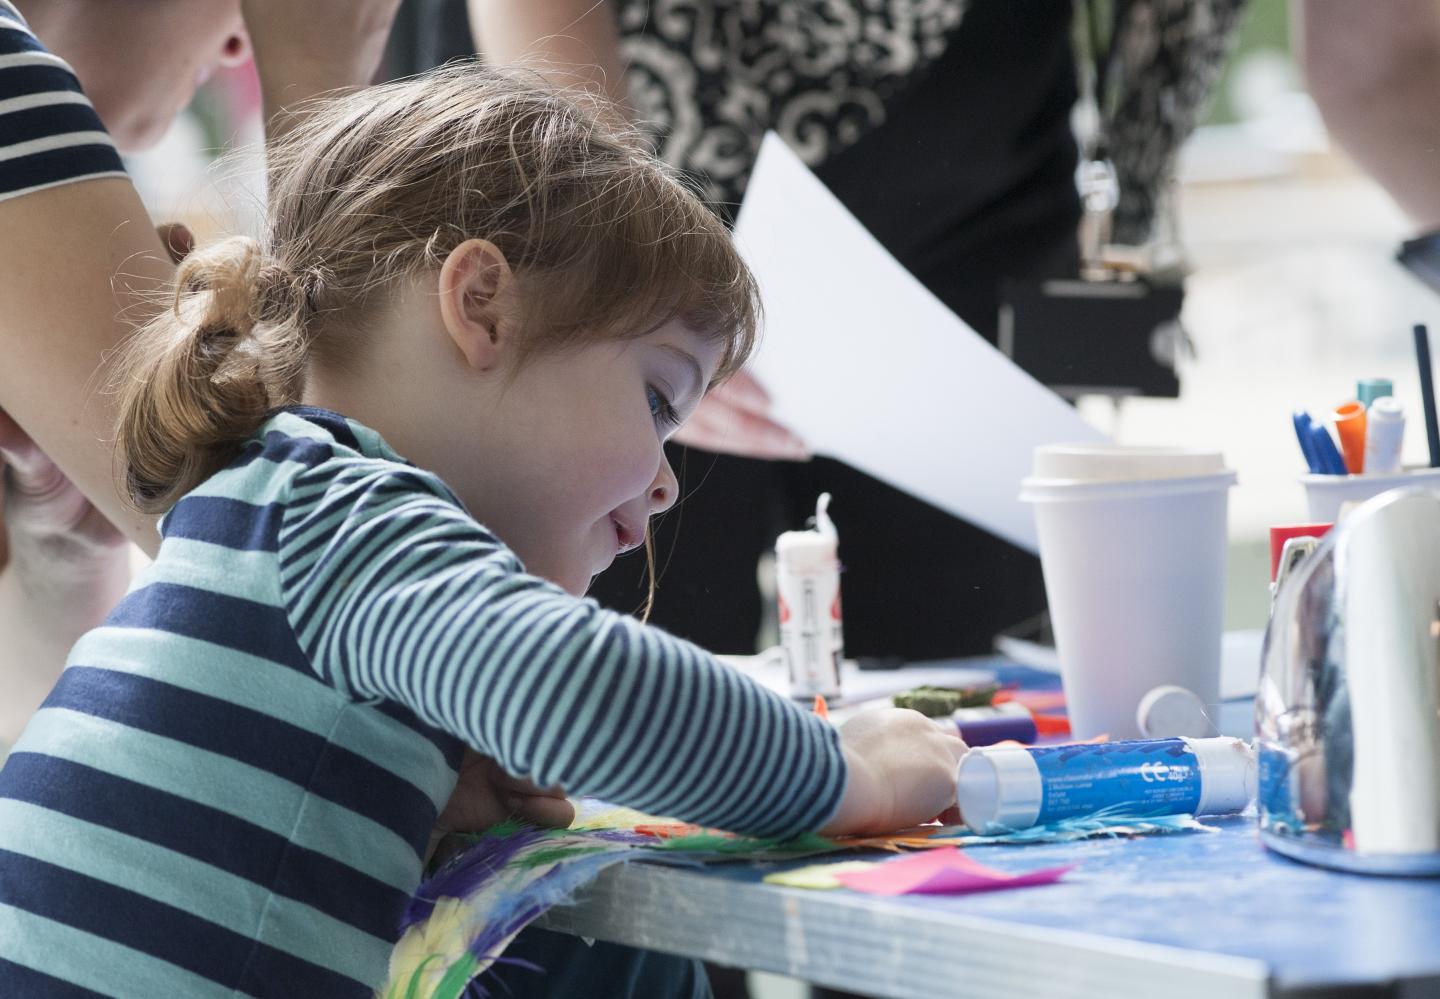 Child participating in craft activity.